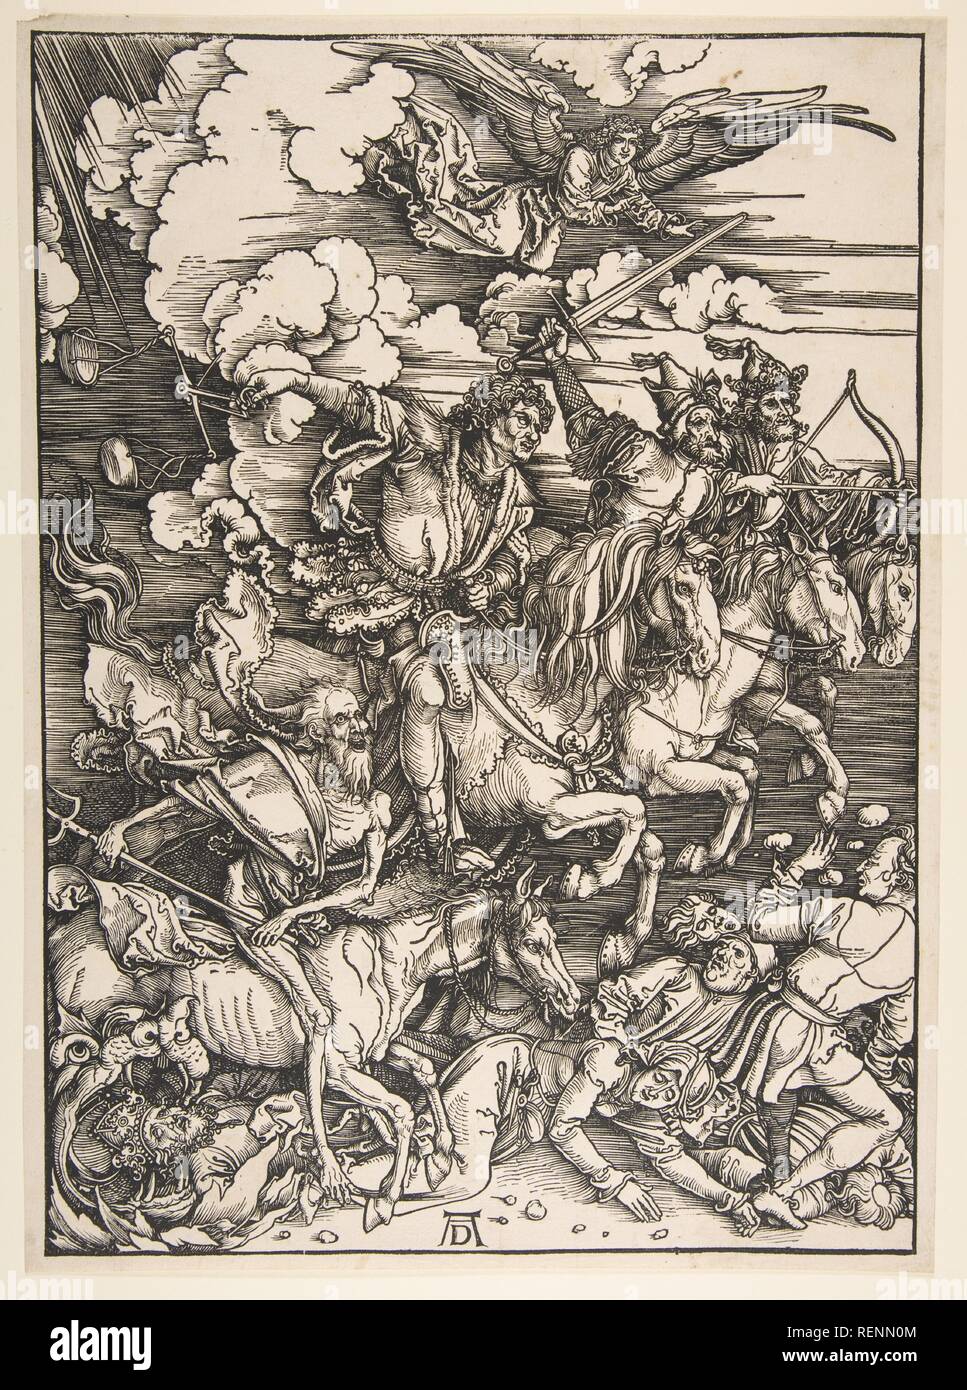 Four Horsemen of the Apocalypse. Artist: Albrecht Dürer (German, Nuremberg 1471-1528 Nuremberg). Date: ca. 1497/1498.  The third woodcut from Dürer's Apocalypse, the Four Horsemen presents a dramatically distilled version of the passage from the book of Revelation (6:1-8). Transforming what was a relatively staid and unthreatening image in earlier illustrated Bibles, Dürer injects motion and danger into this climactic moment through his subtle manipulation of the wood block. The parallel lines across the image establish a basic middle tone, against which the artist silhouettes and overlaps the Stock Photo